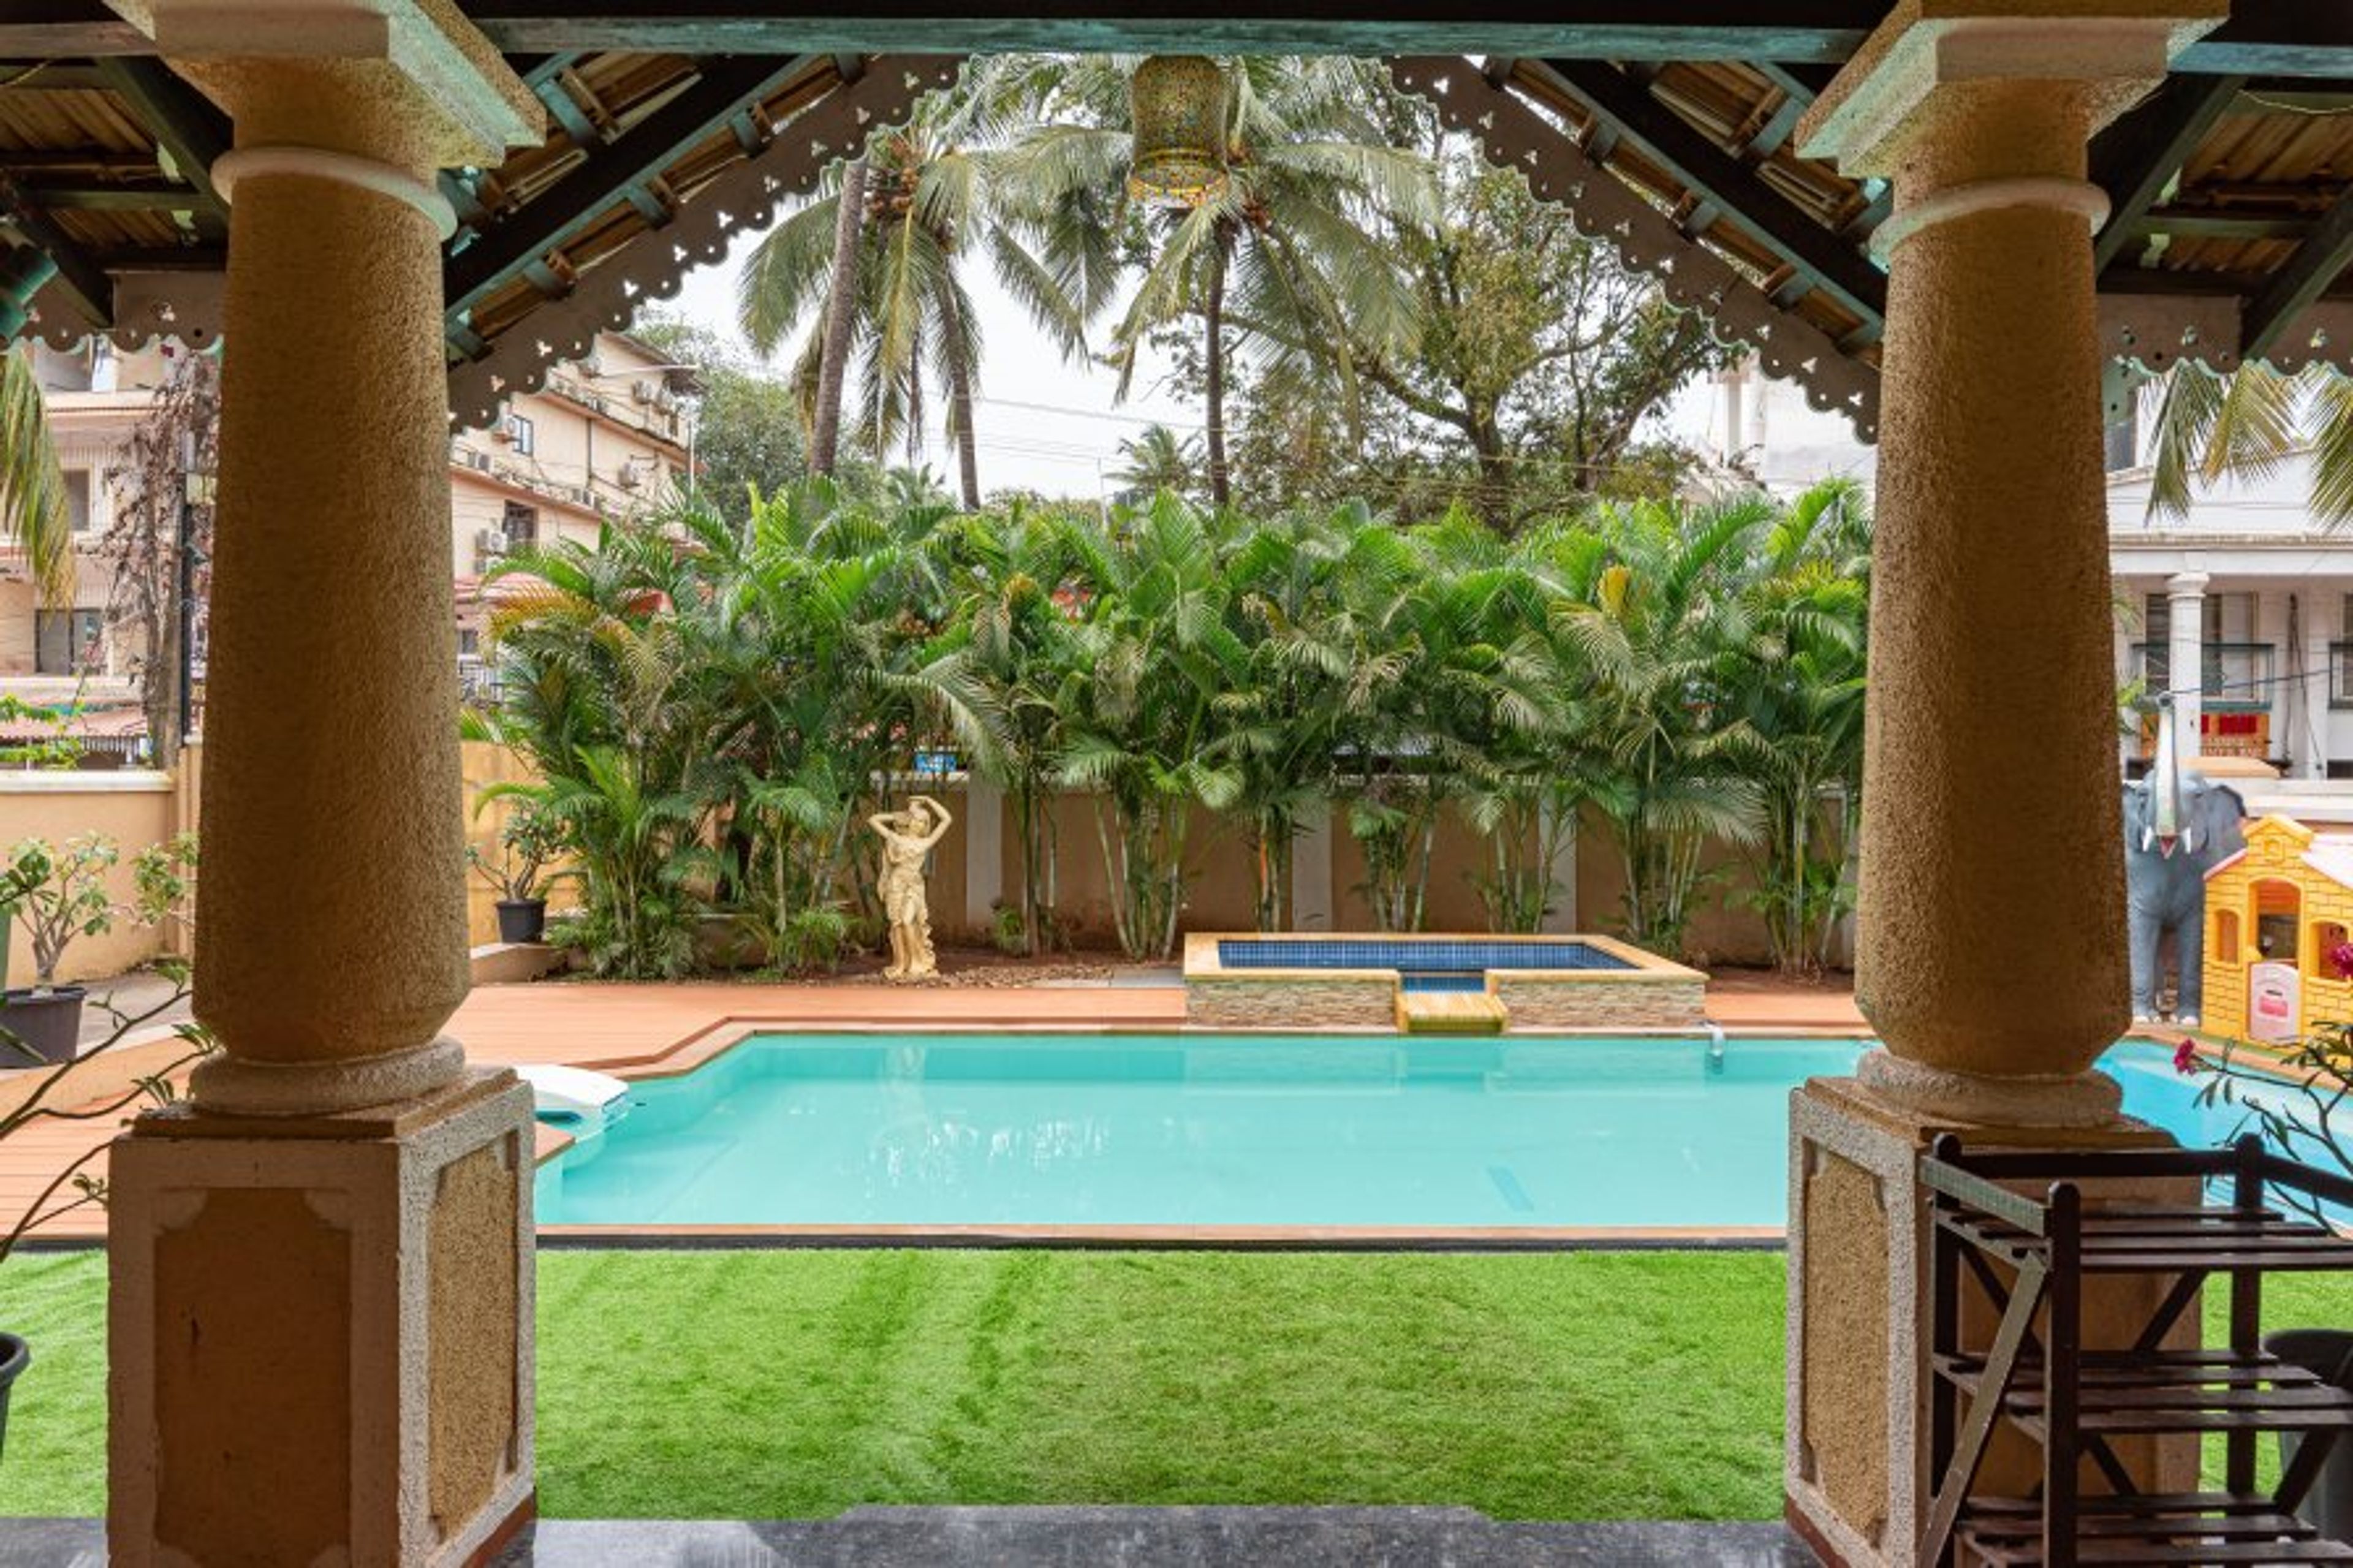 Enjoy a charming private sit out area with a vista of the pool